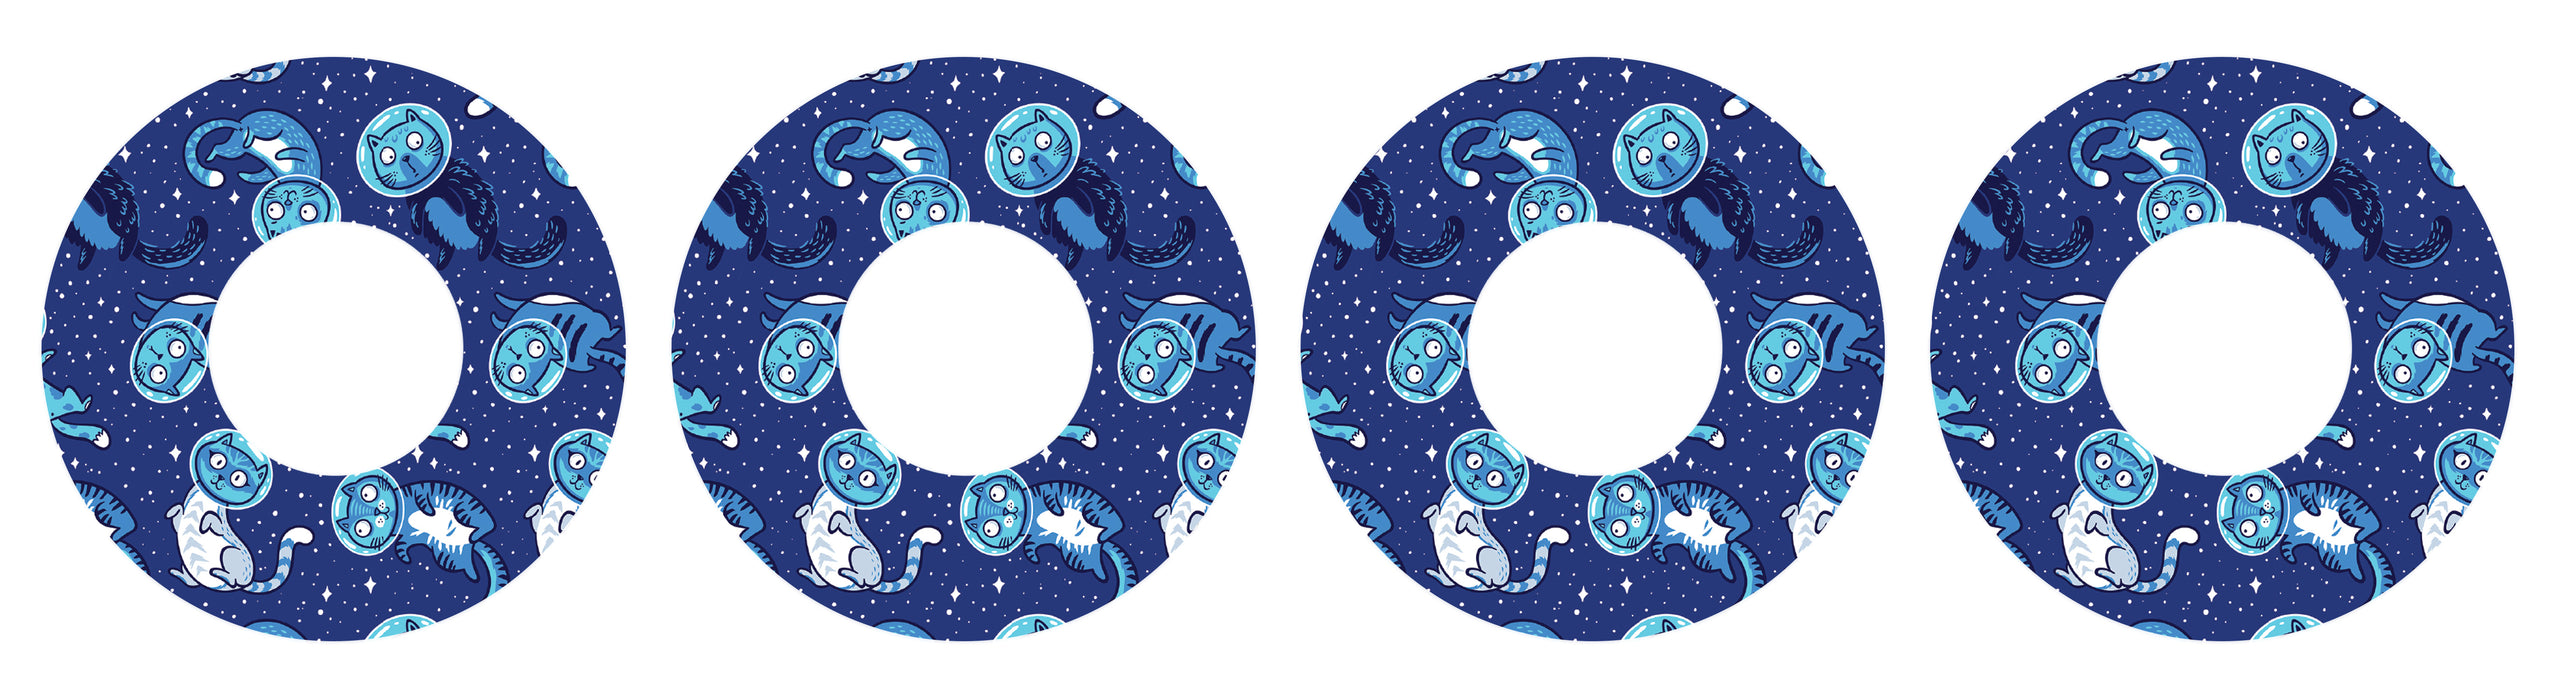 Astronaut Cats Patch+ Tape Designed for the FreeStyle Libre 2